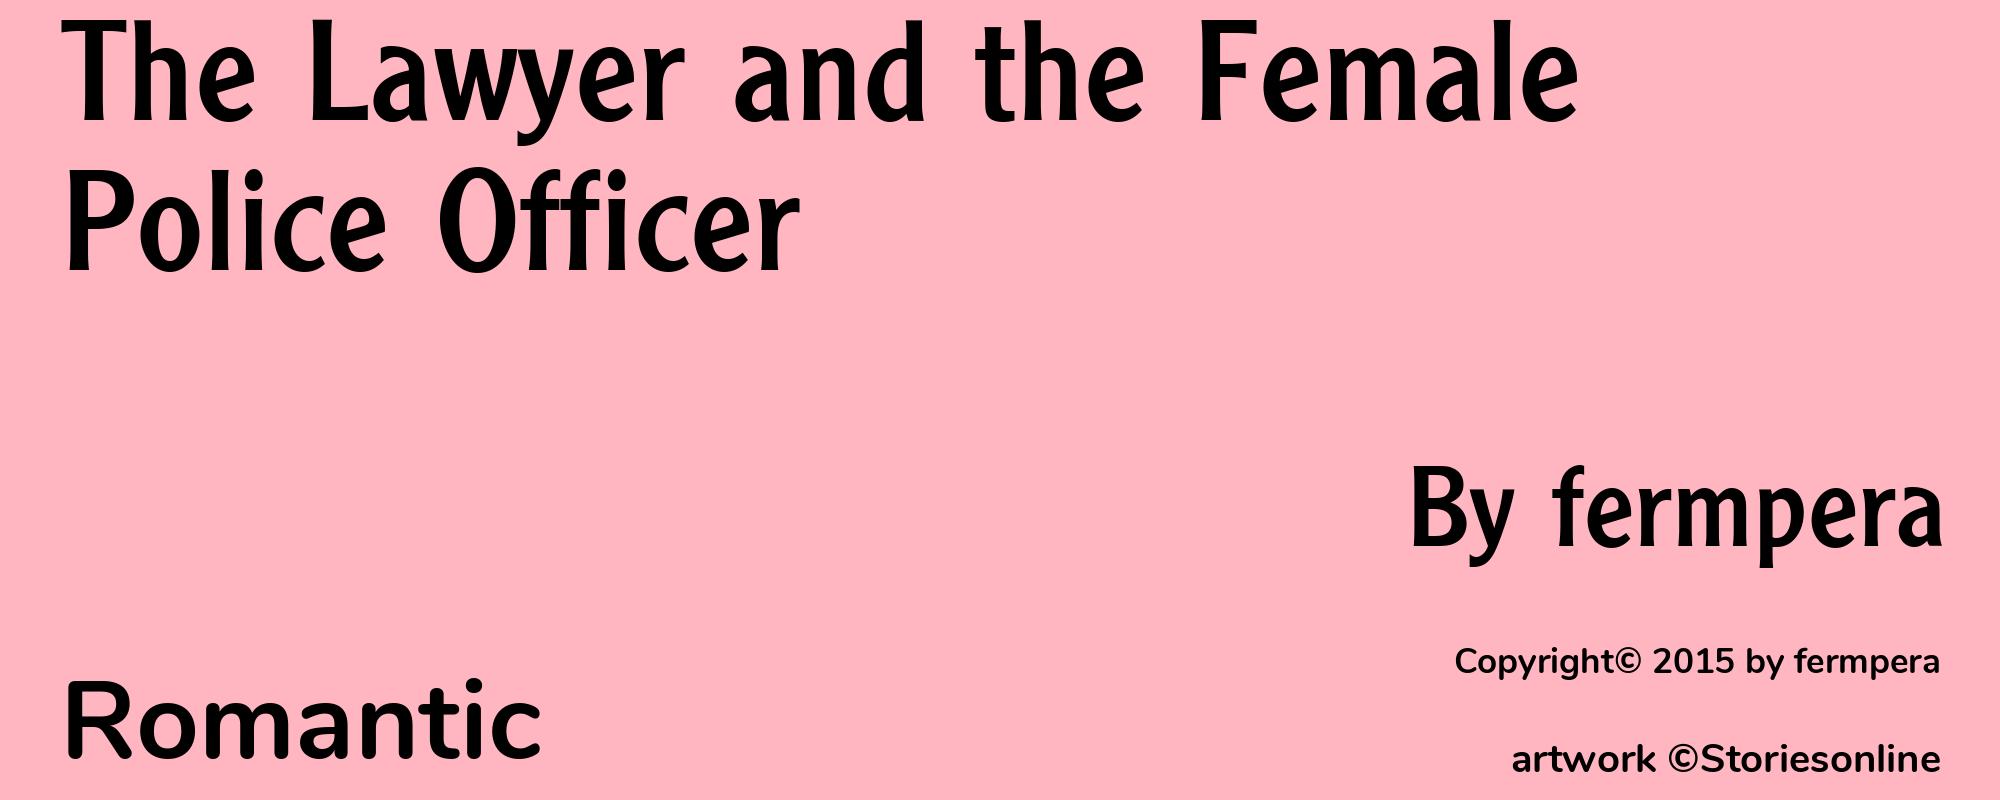 The Lawyer and the Female Police Officer - Cover